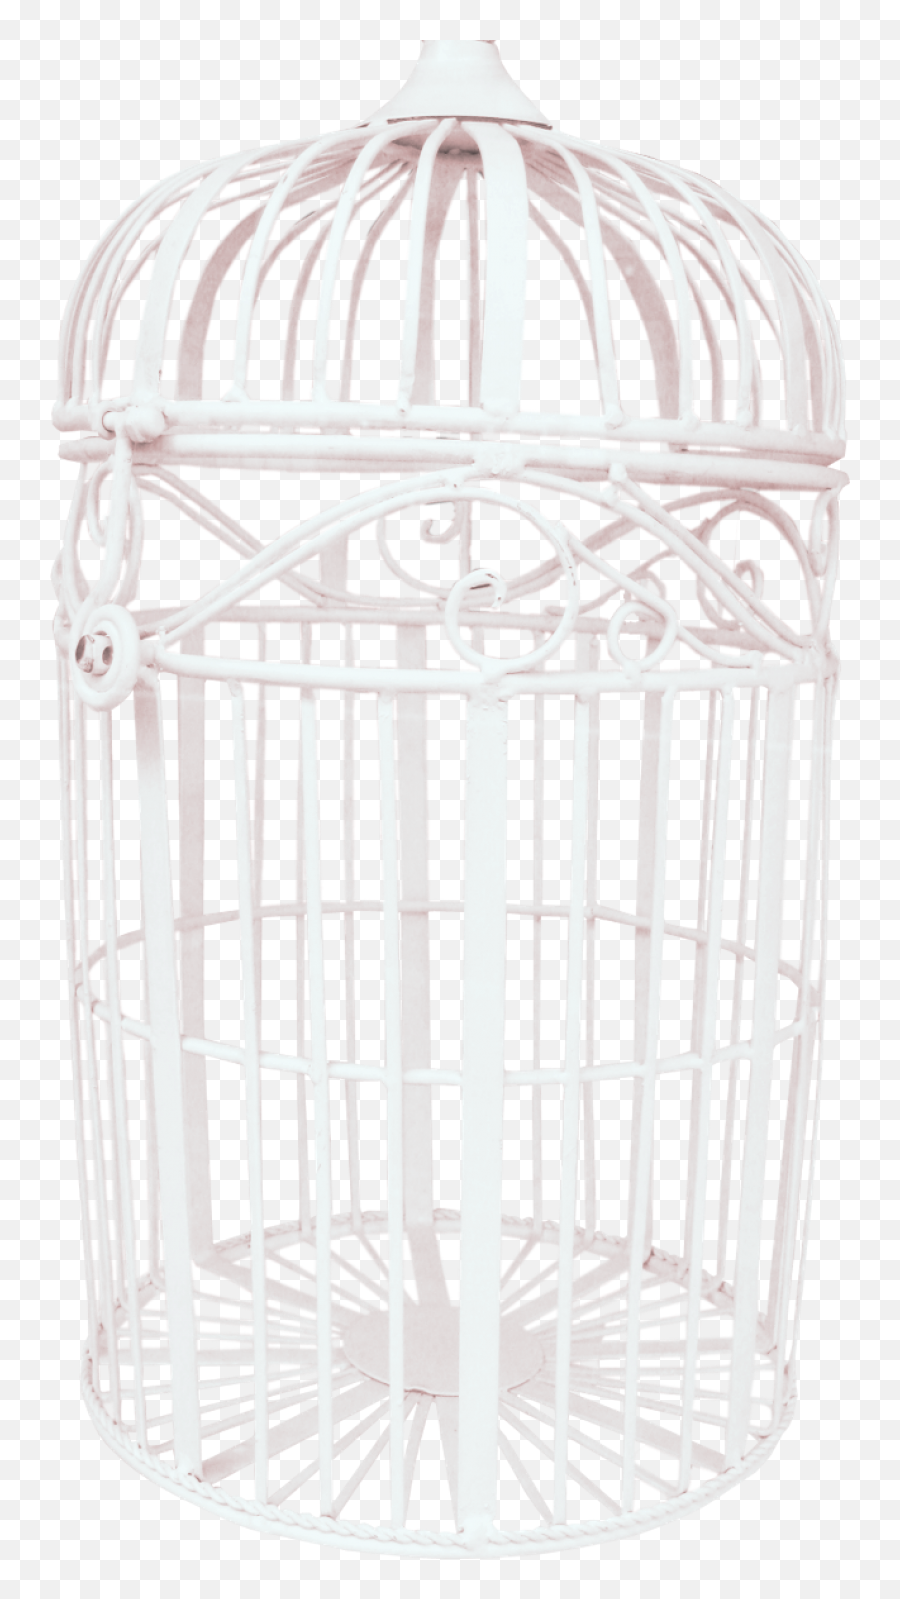 Download Bird Cage Png Image For Free - Cage,Bird Cage Png